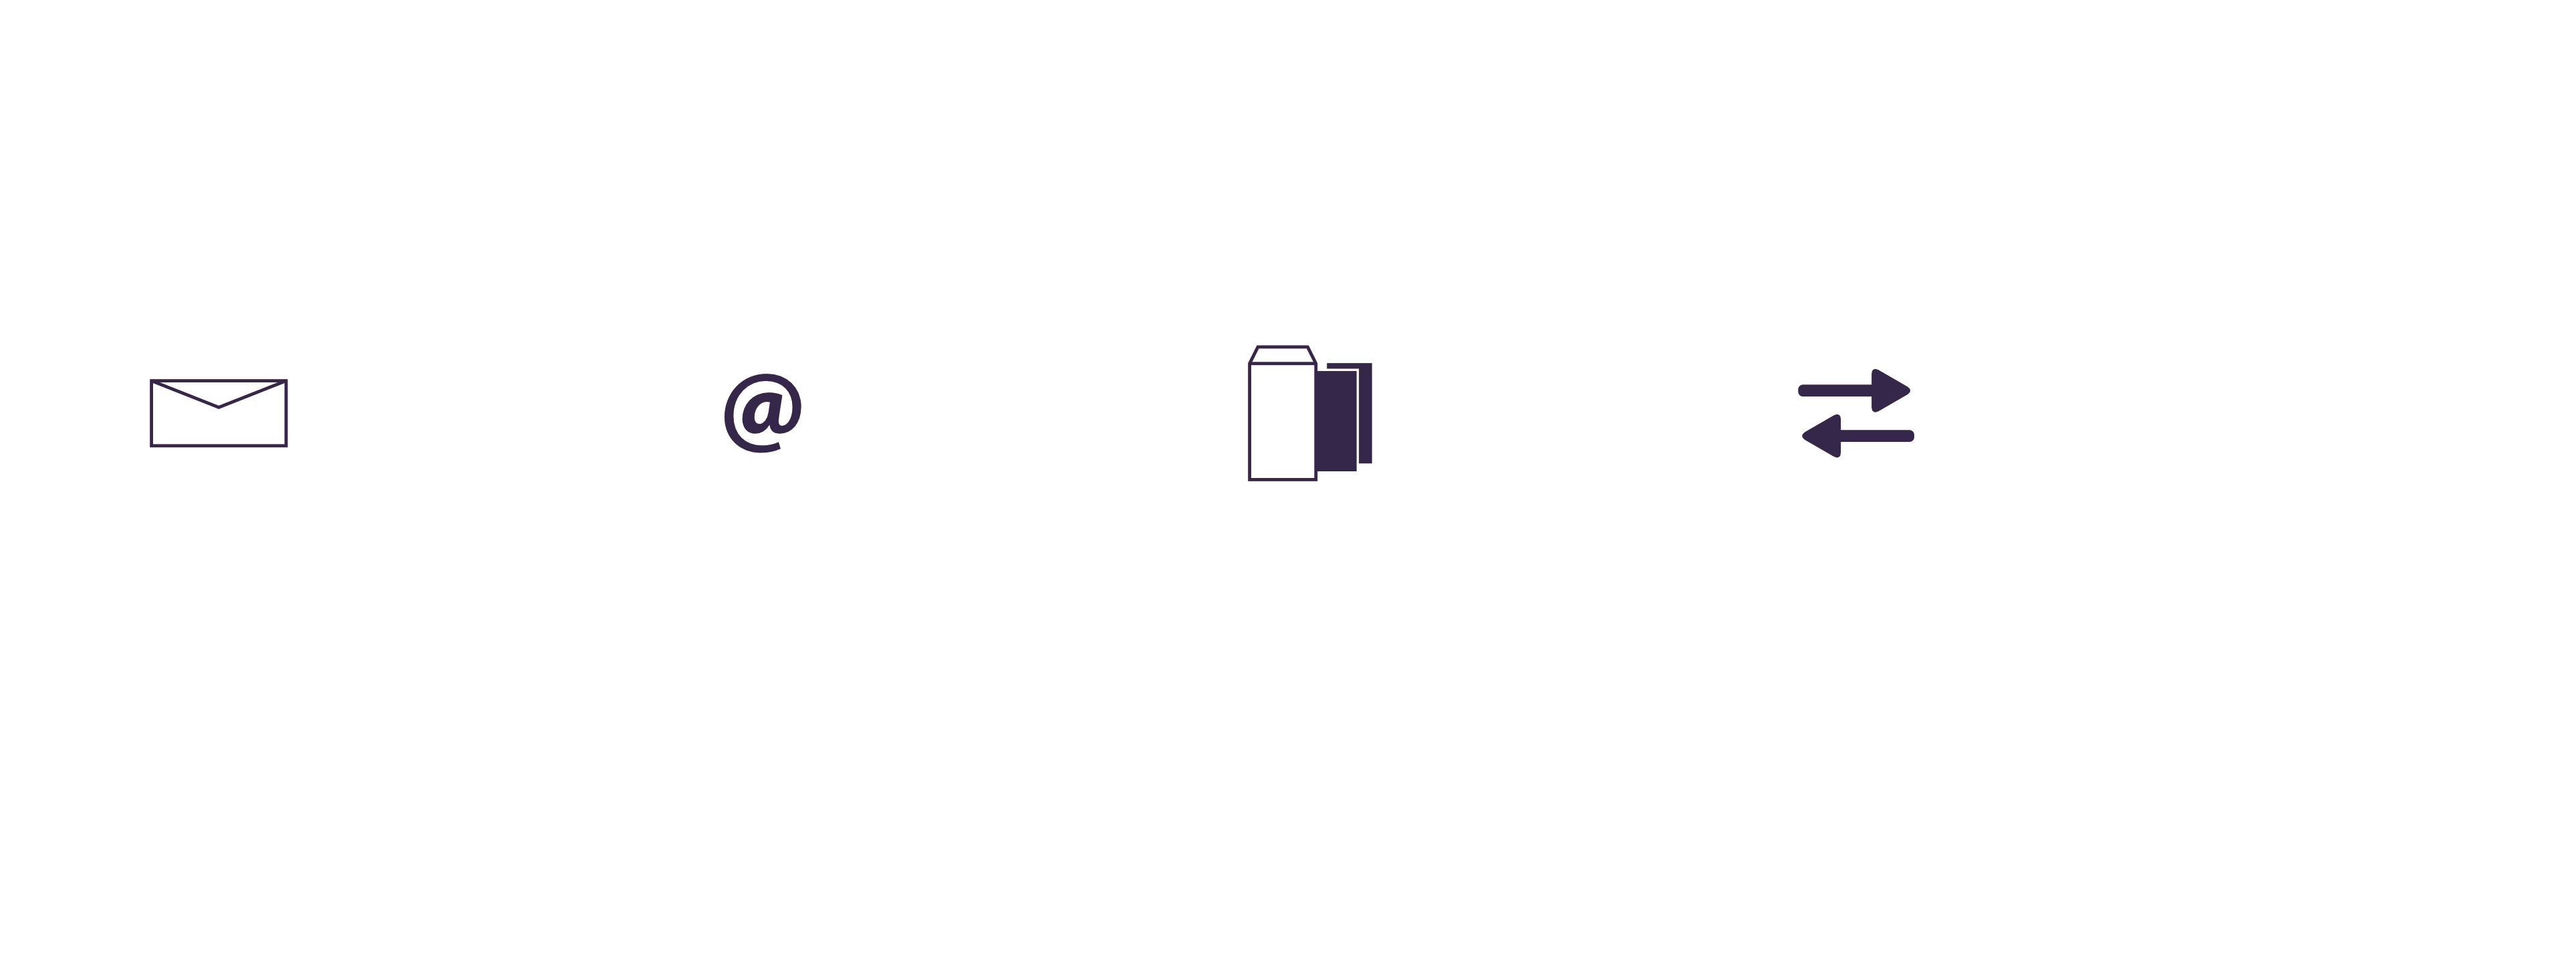 Option for Direct Marketing Promotion Services